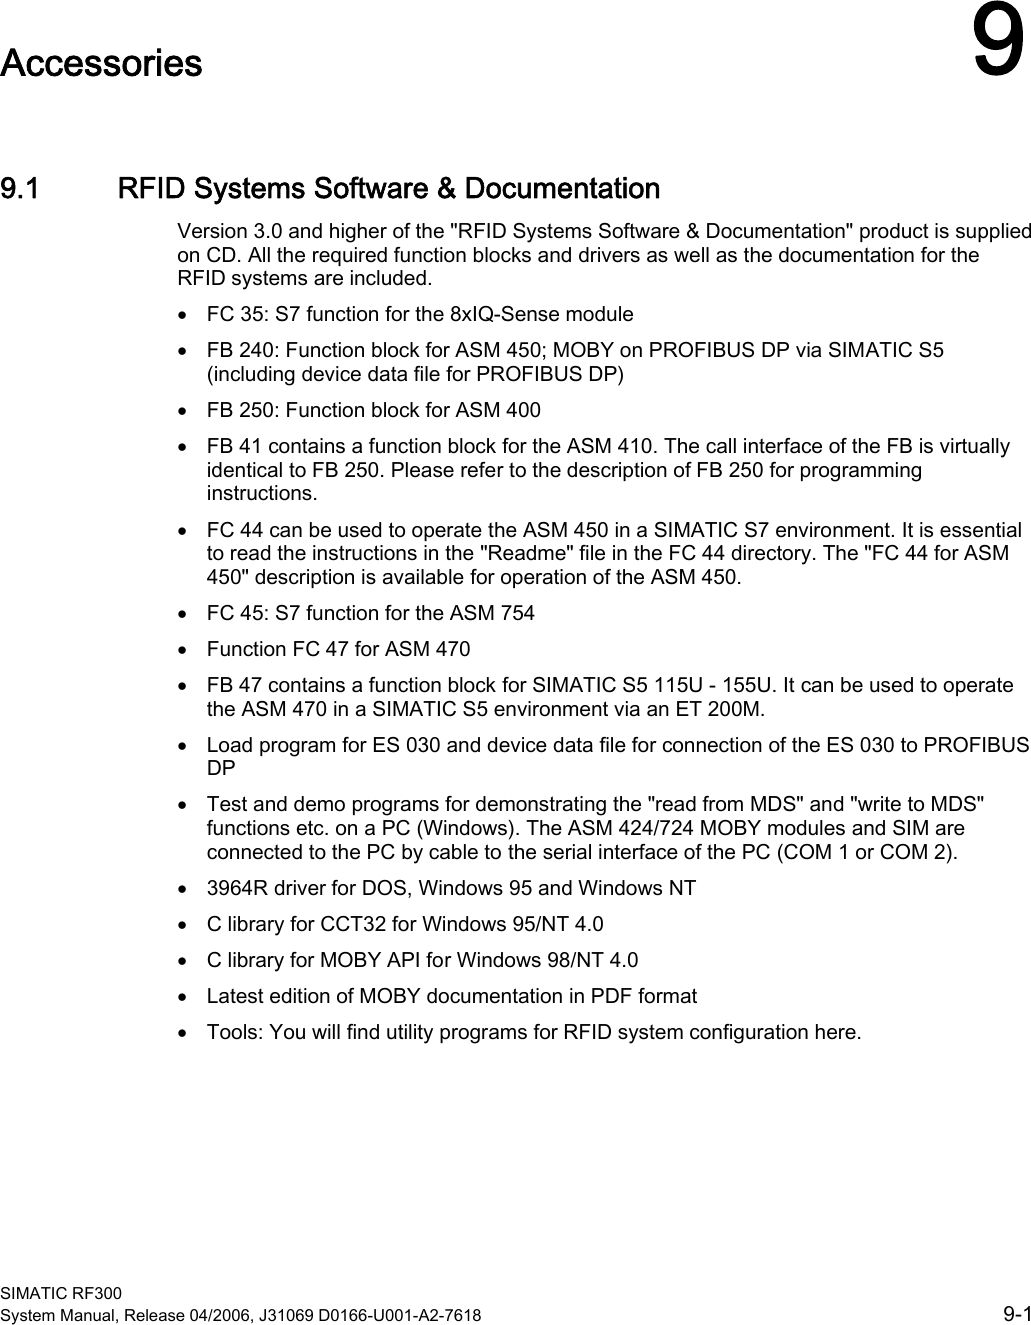  SIMATIC RF300 System Manual, Release 04/2006, J31069 D0166-U001-A2-7618  9-1 Accessories  99.1 9.1 RFID Systems Software &amp; Documentation Version 3.0 and higher of the &quot;RFID Systems Software &amp; Documentation&quot; product is supplied on CD. All the required function blocks and drivers as well as the documentation for the RFID systems are included.  • FC 35: S7 function for the 8xIQ-Sense module • FB 240: Function block for ASM 450; MOBY on PROFIBUS DP via SIMATIC S5 (including device data file for PROFIBUS DP) • FB 250: Function block for ASM 400 • FB 41 contains a function block for the ASM 410. The call interface of the FB is virtually identical to FB 250. Please refer to the description of FB 250 for programming instructions. • FC 44 can be used to operate the ASM 450 in a SIMATIC S7 environment. It is essential to read the instructions in the &quot;Readme&quot; file in the FC 44 directory. The &quot;FC 44 for ASM 450&quot; description is available for operation of the ASM 450. • FC 45: S7 function for the ASM 754 • Function FC 47 for ASM 470 • FB 47 contains a function block for SIMATIC S5 115U - 155U. It can be used to operate the ASM 470 in a SIMATIC S5 environment via an ET 200M. • Load program for ES 030 and device data file for connection of the ES 030 to PROFIBUS DP • Test and demo programs for demonstrating the &quot;read from MDS&quot; and &quot;write to MDS&quot; functions etc. on a PC (Windows). The ASM 424/724 MOBY modules and SIM are connected to the PC by cable to the serial interface of the PC (COM 1 or COM 2). • 3964R driver for DOS, Windows 95 and Windows NT • C library for CCT32 for Windows 95/NT 4.0 • C library for MOBY API for Windows 98/NT 4.0 • Latest edition of MOBY documentation in PDF format • Tools: You will find utility programs for RFID system configuration here.  